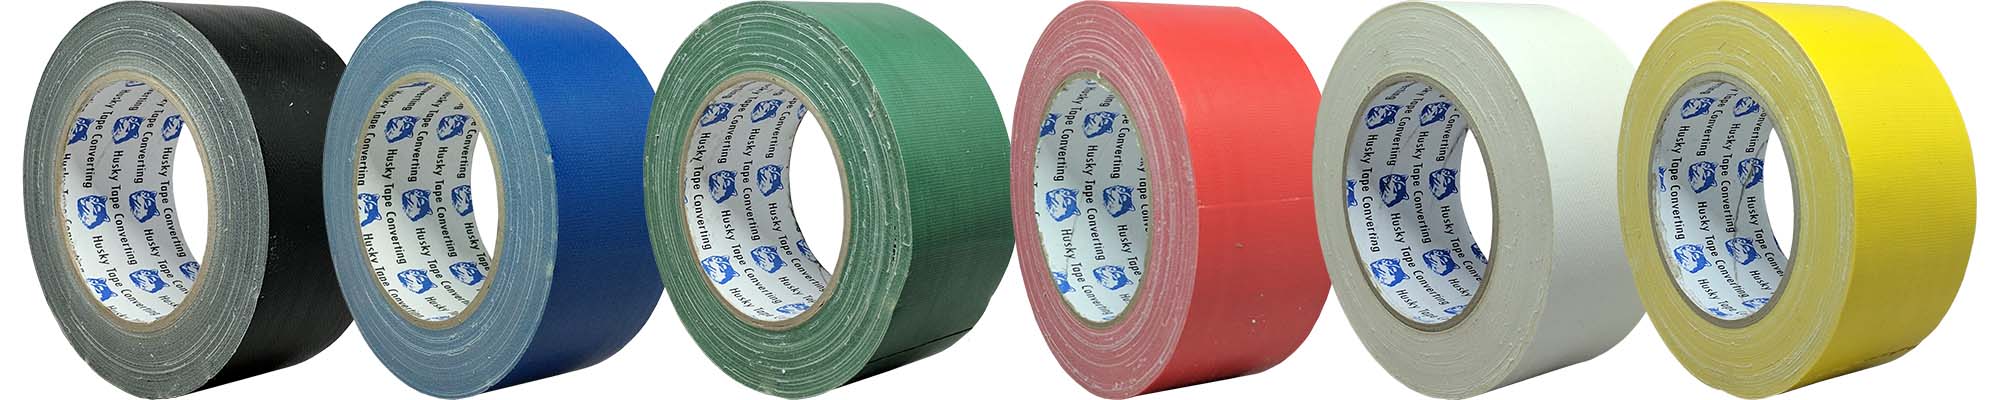 Adhesive Waterproof Book Binding Cloth Tapes In 6 Colours